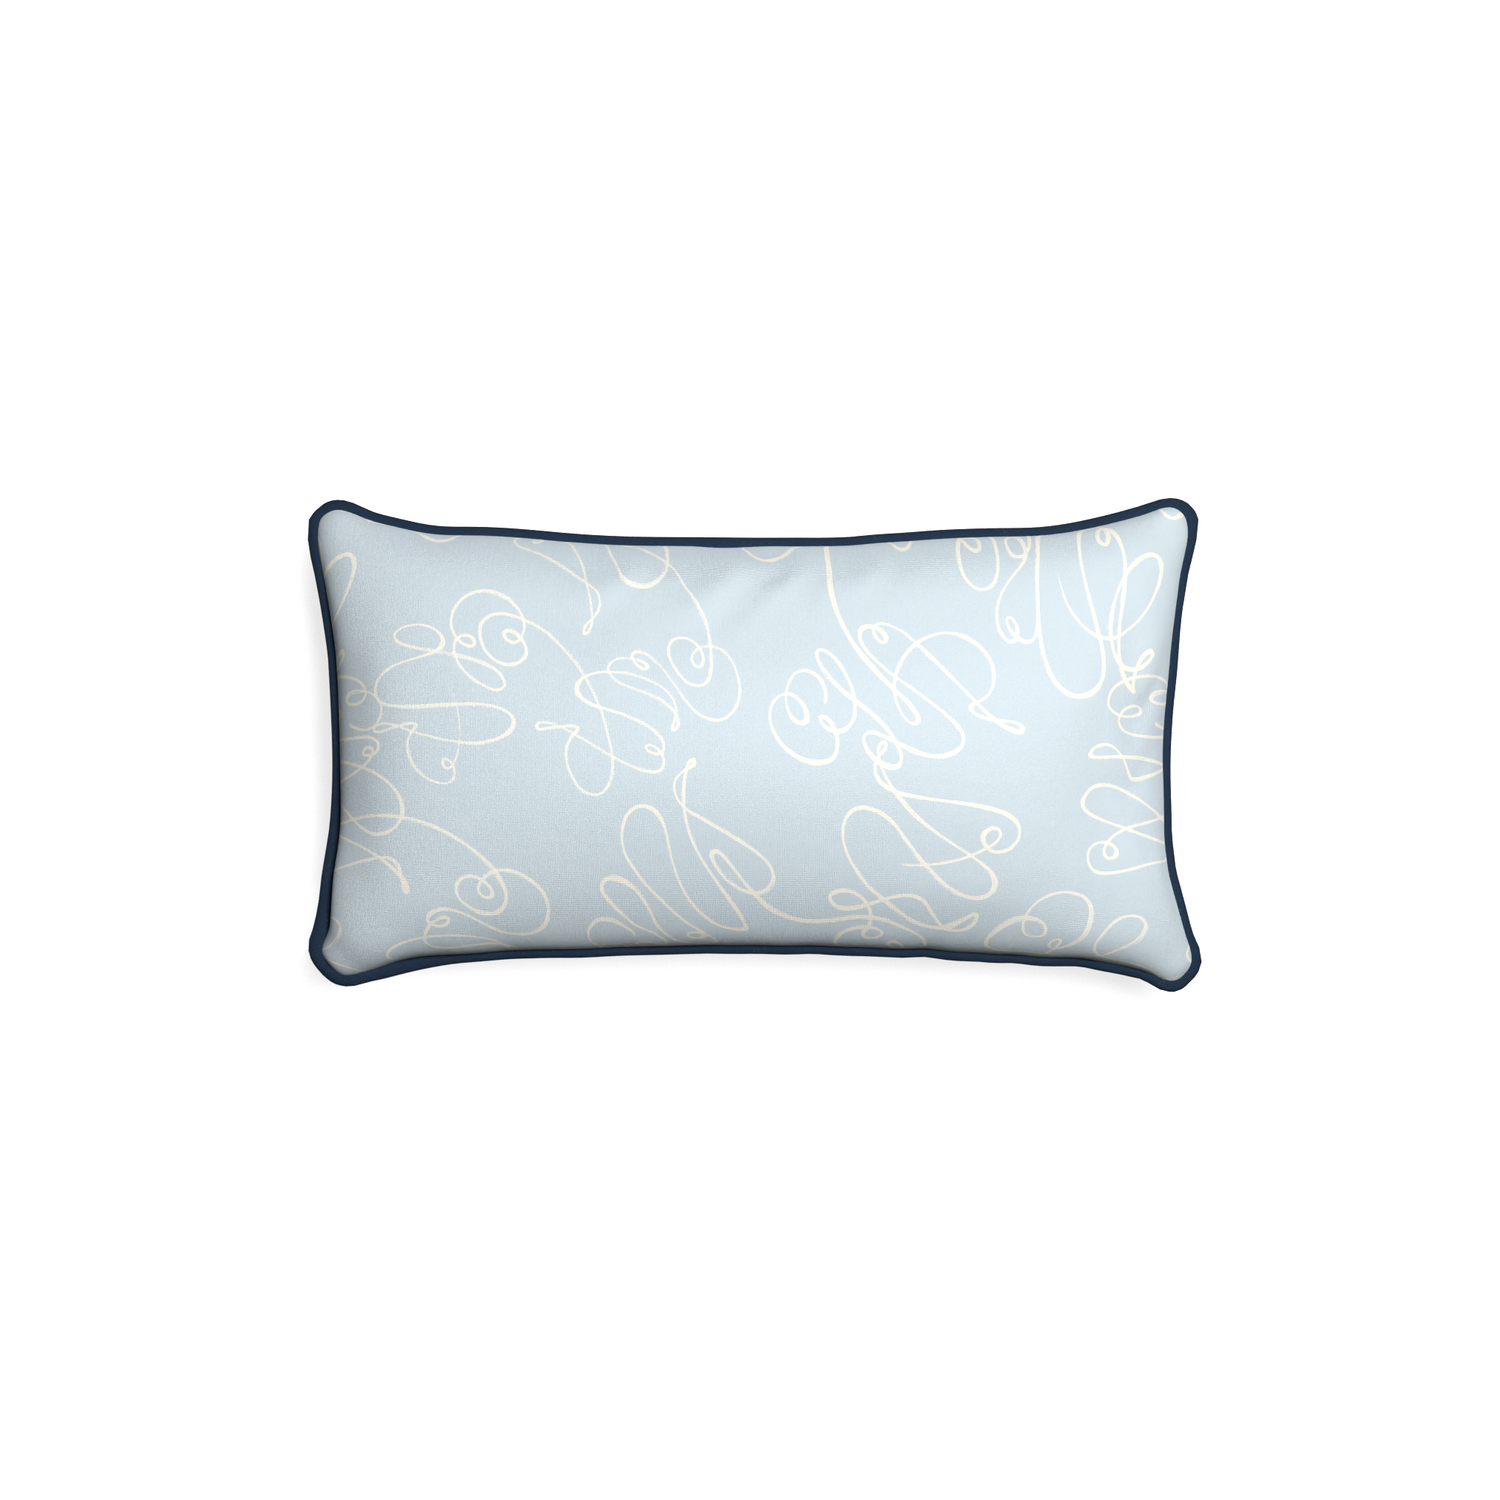 Petite-lumbar mirabella custom powder blue abstractpillow with c piping on white background